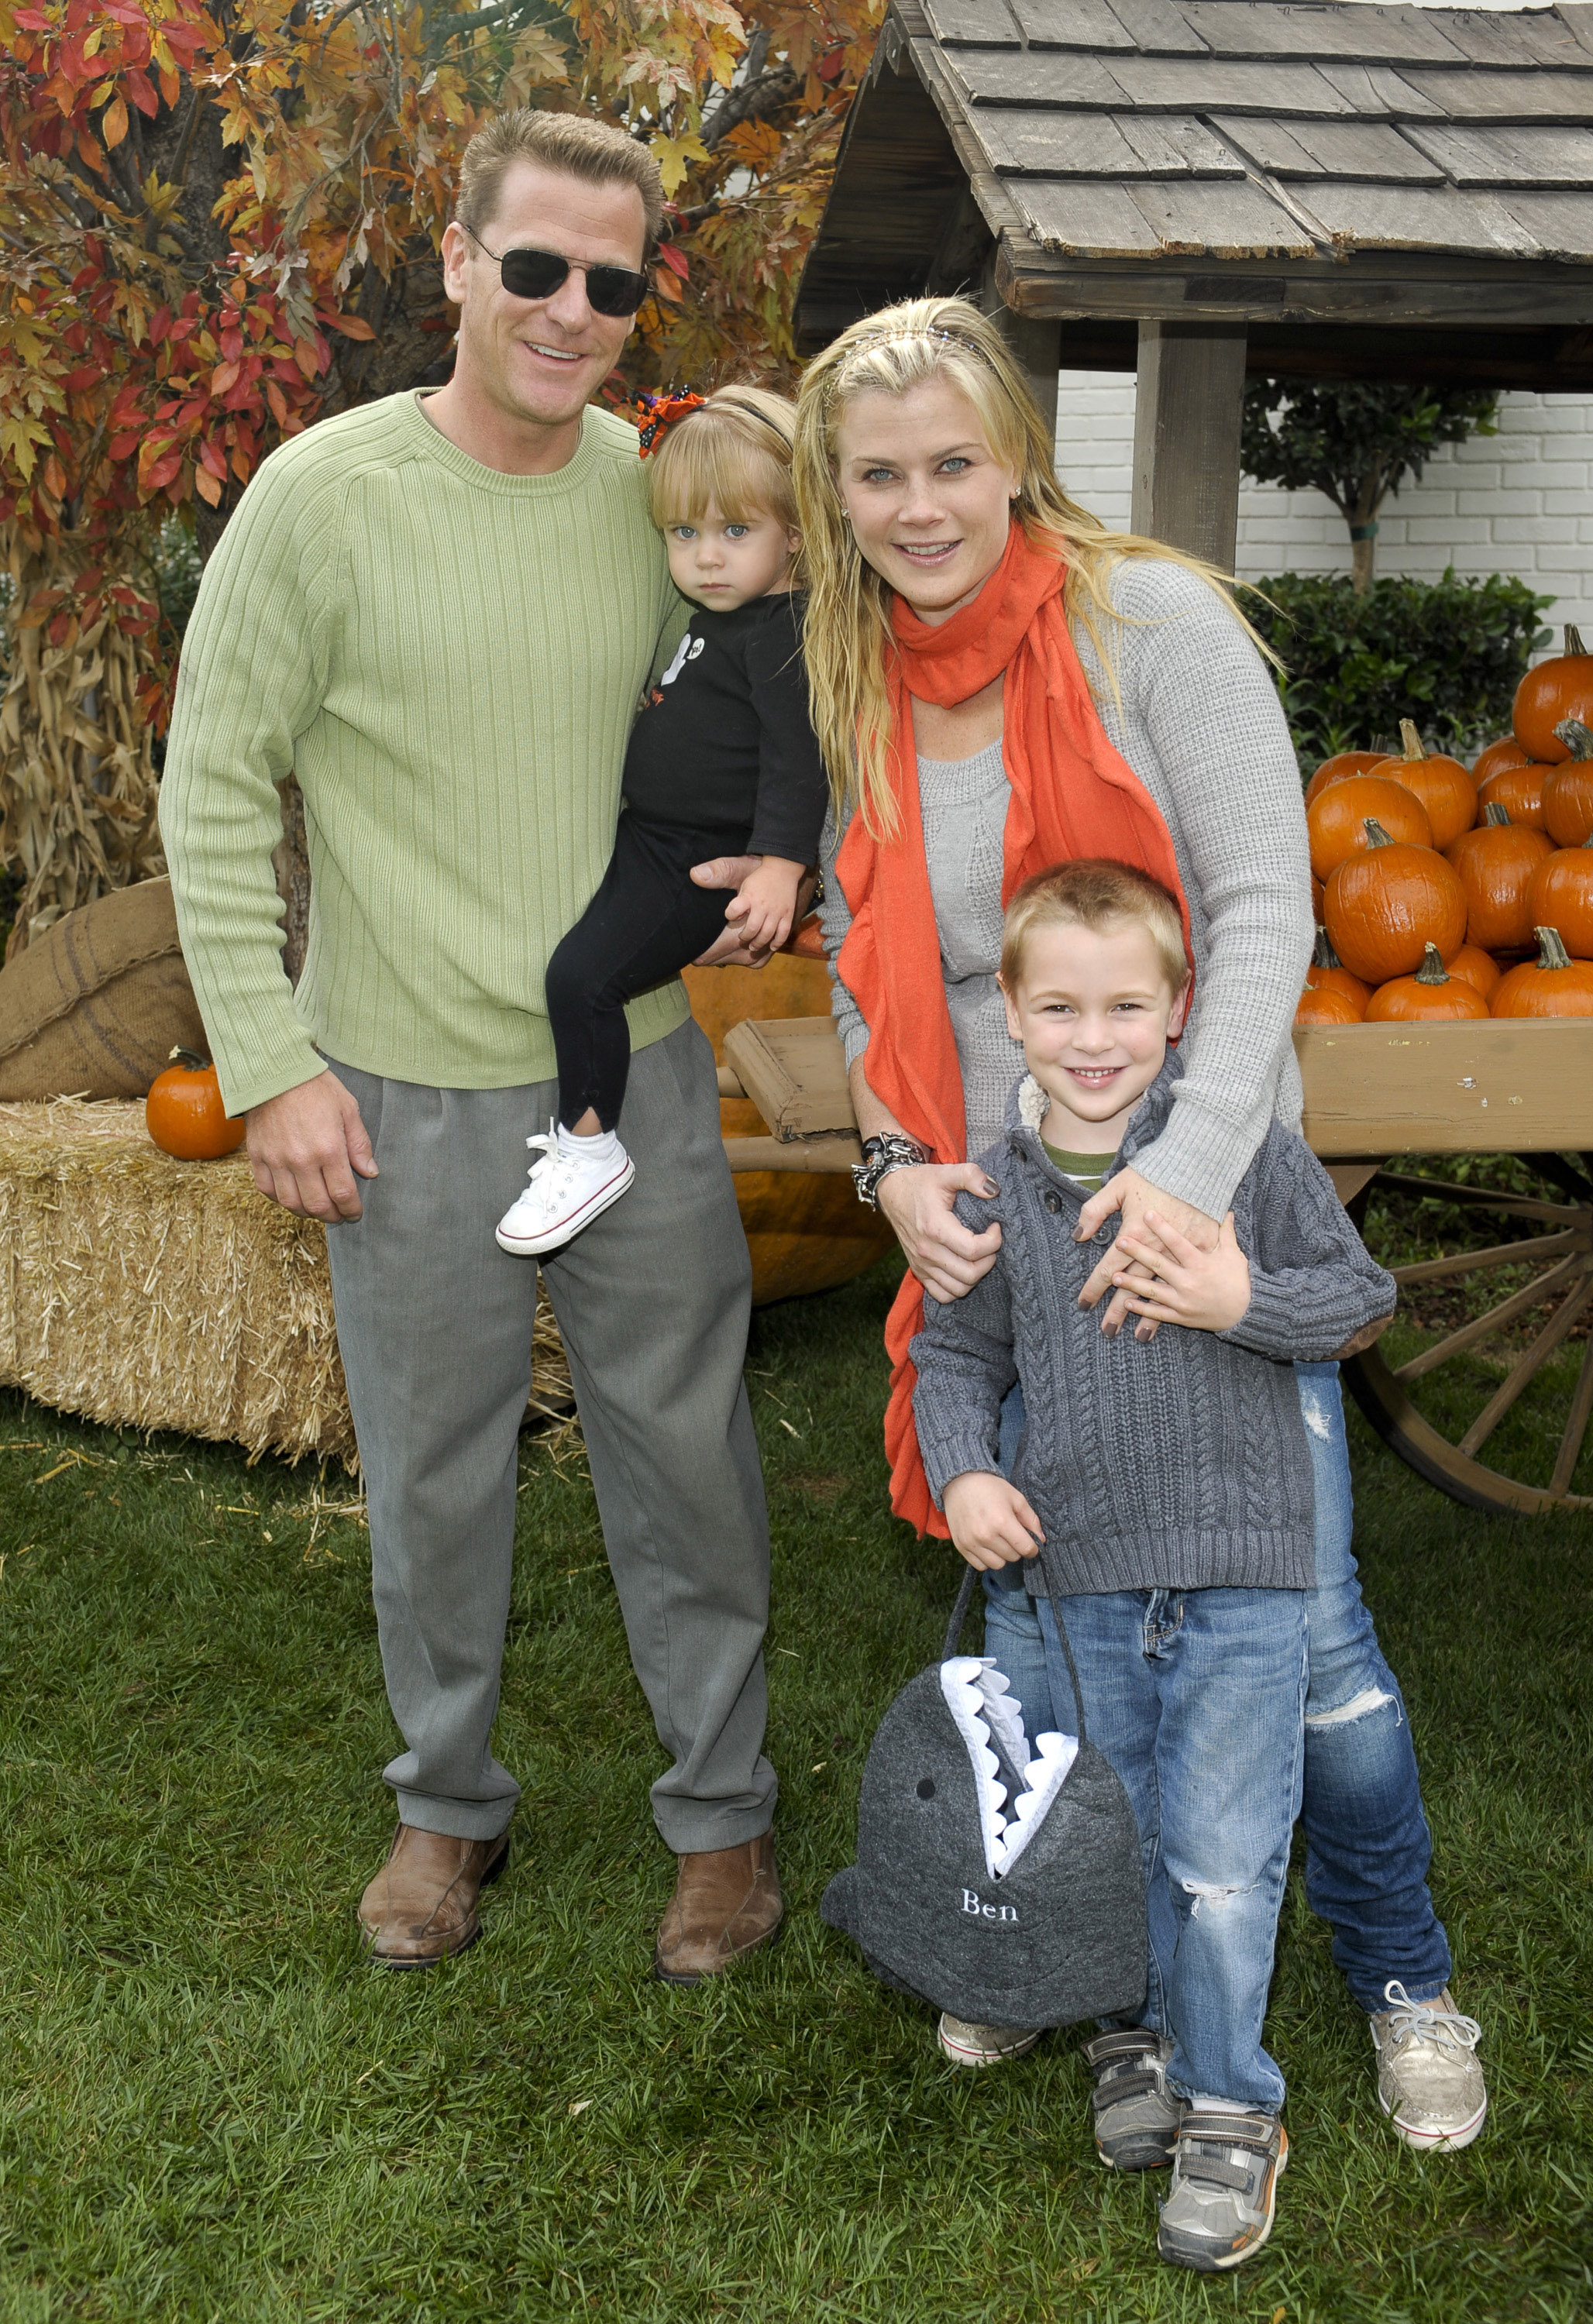 Alison Sweeney, David Sanov, and their children, Megan and Benjamin, at a private residence on October 23, 2010, in Los Angeles, California | Source: Getty Images